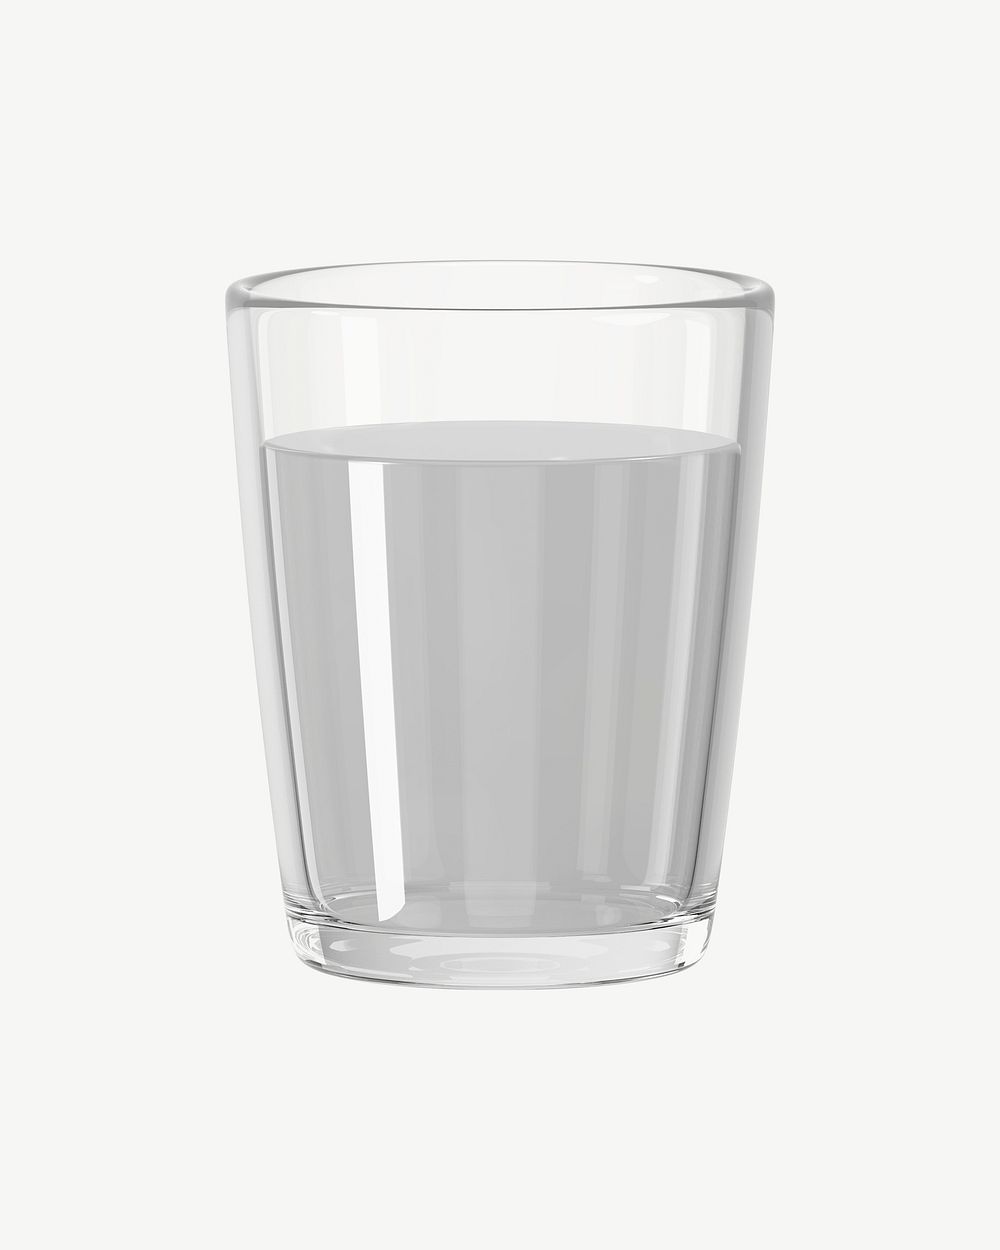 3D glass of water, collage element psd